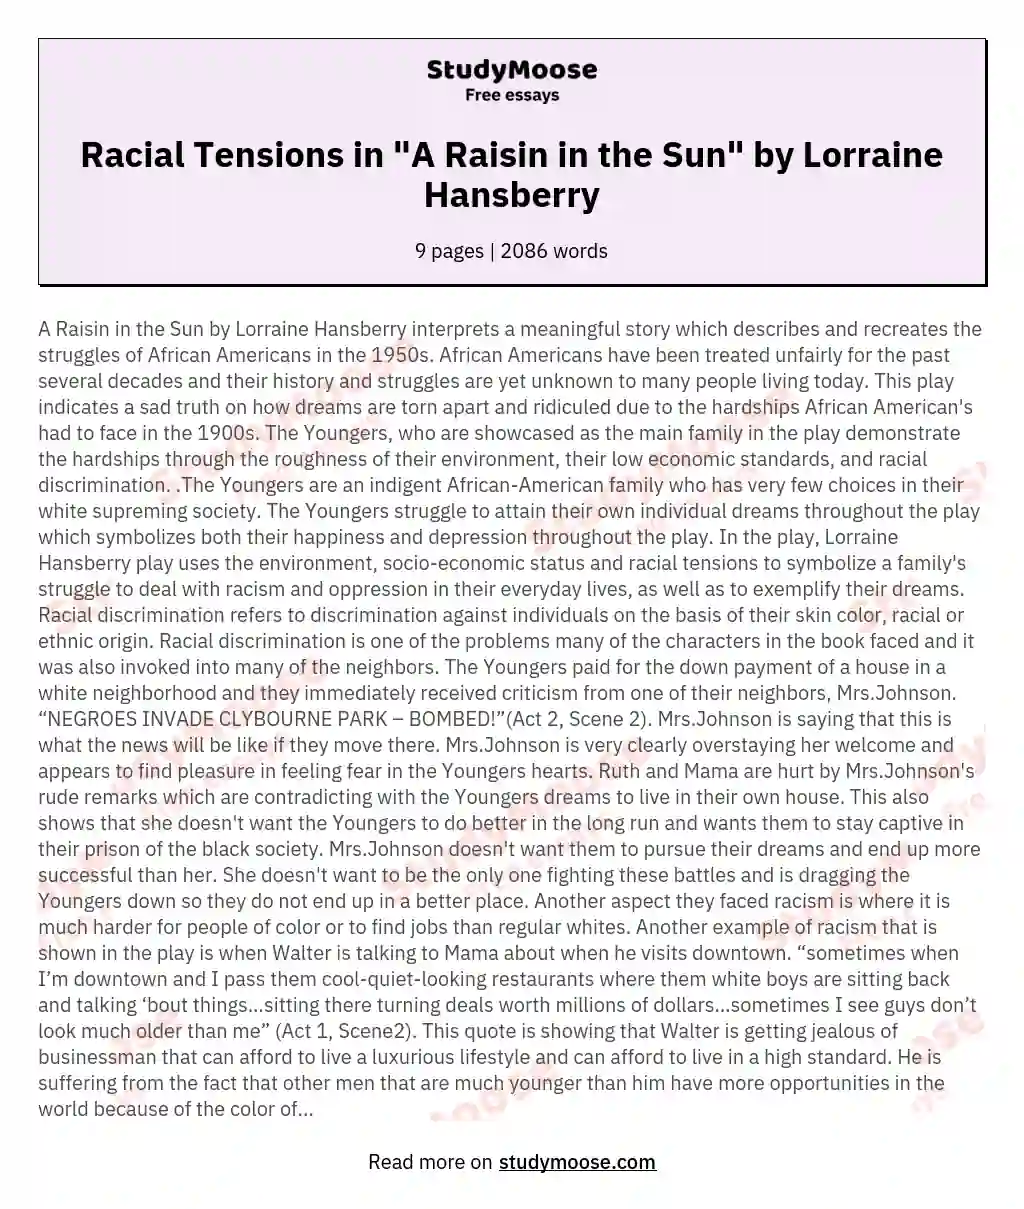 Racial Tensions in "A Raisin in the Sun" by Lorraine Hansberry